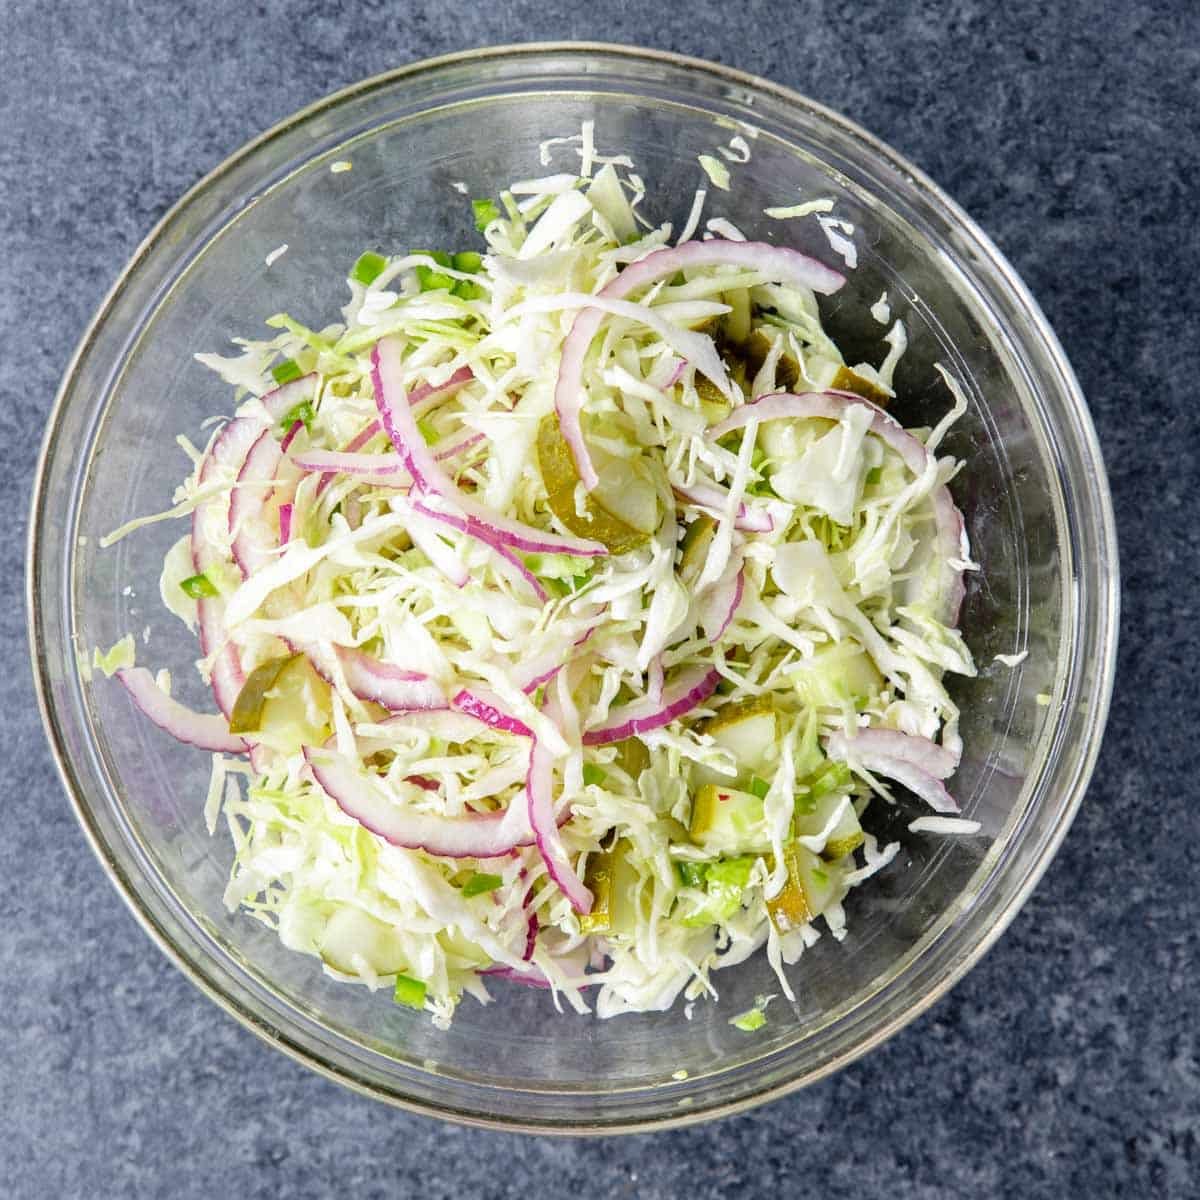 a bowl of slaw to top burgers